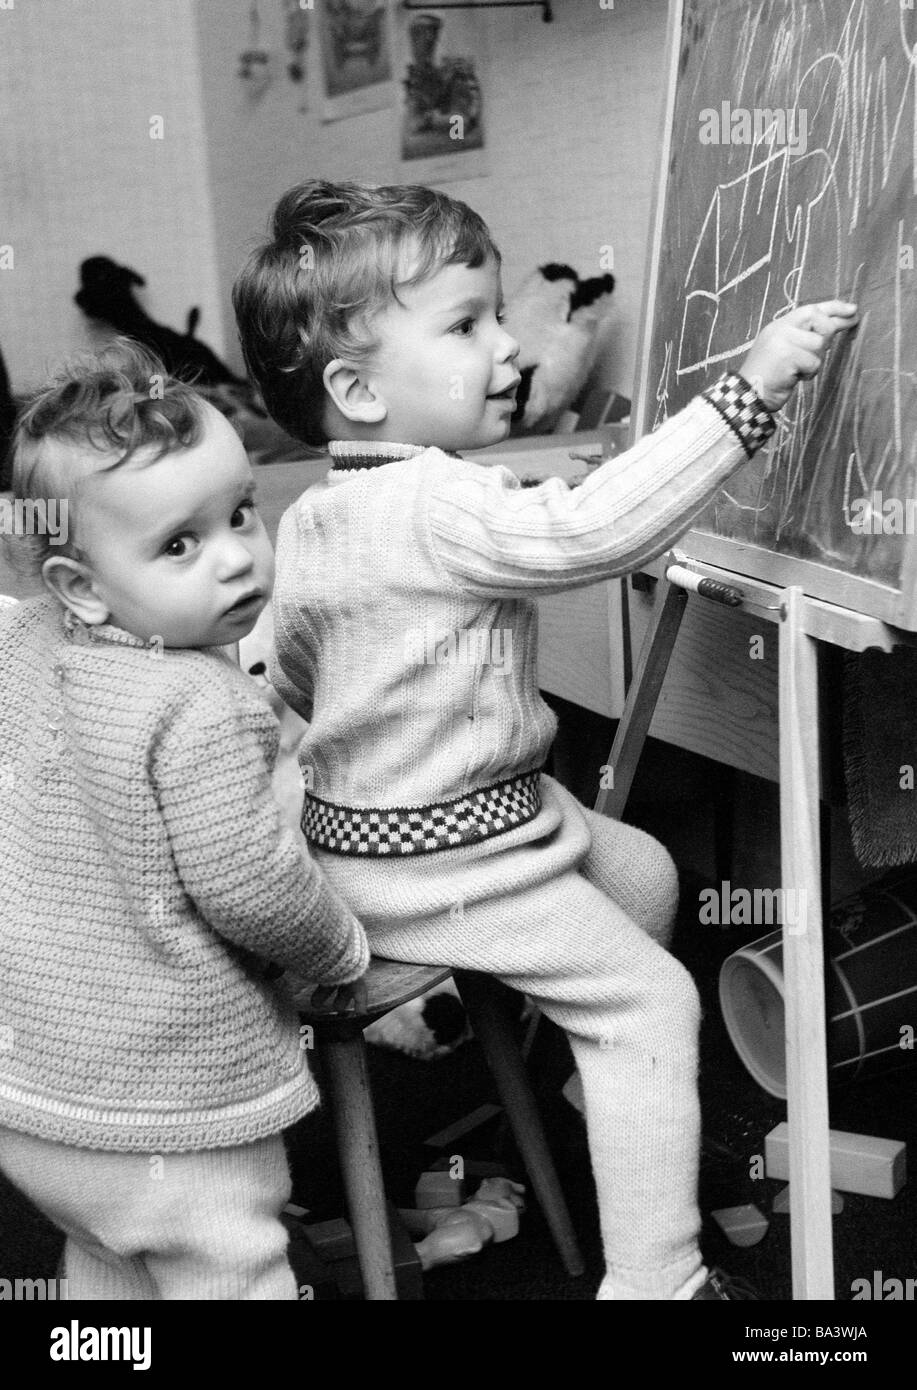 Seventies, black and white photo, people, children, little boy and little girl draw on a blackboard, aged 2 to 3 years, aged 5 to 7 years, Uta, Volker Stock Photo